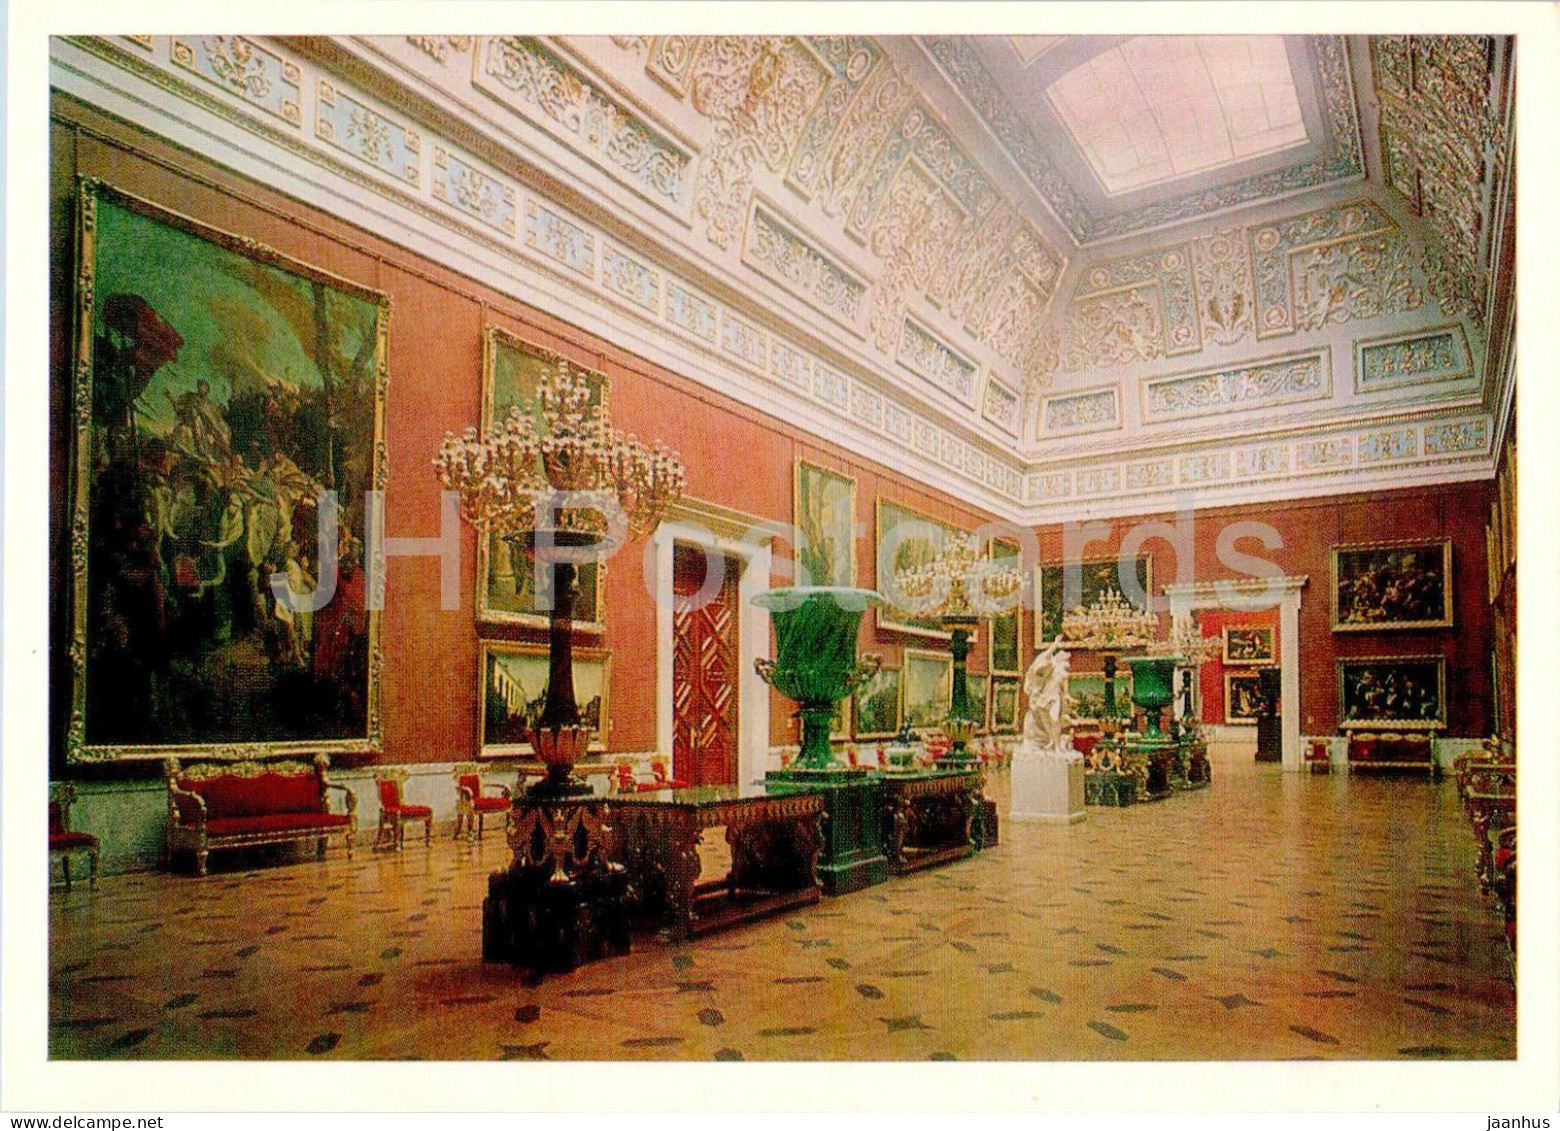 Leningrad - St Petersburg - The Great Top-lighted Hall In The New Hermitage - Museum - 1984 - Russia USSR - Unused - Russland